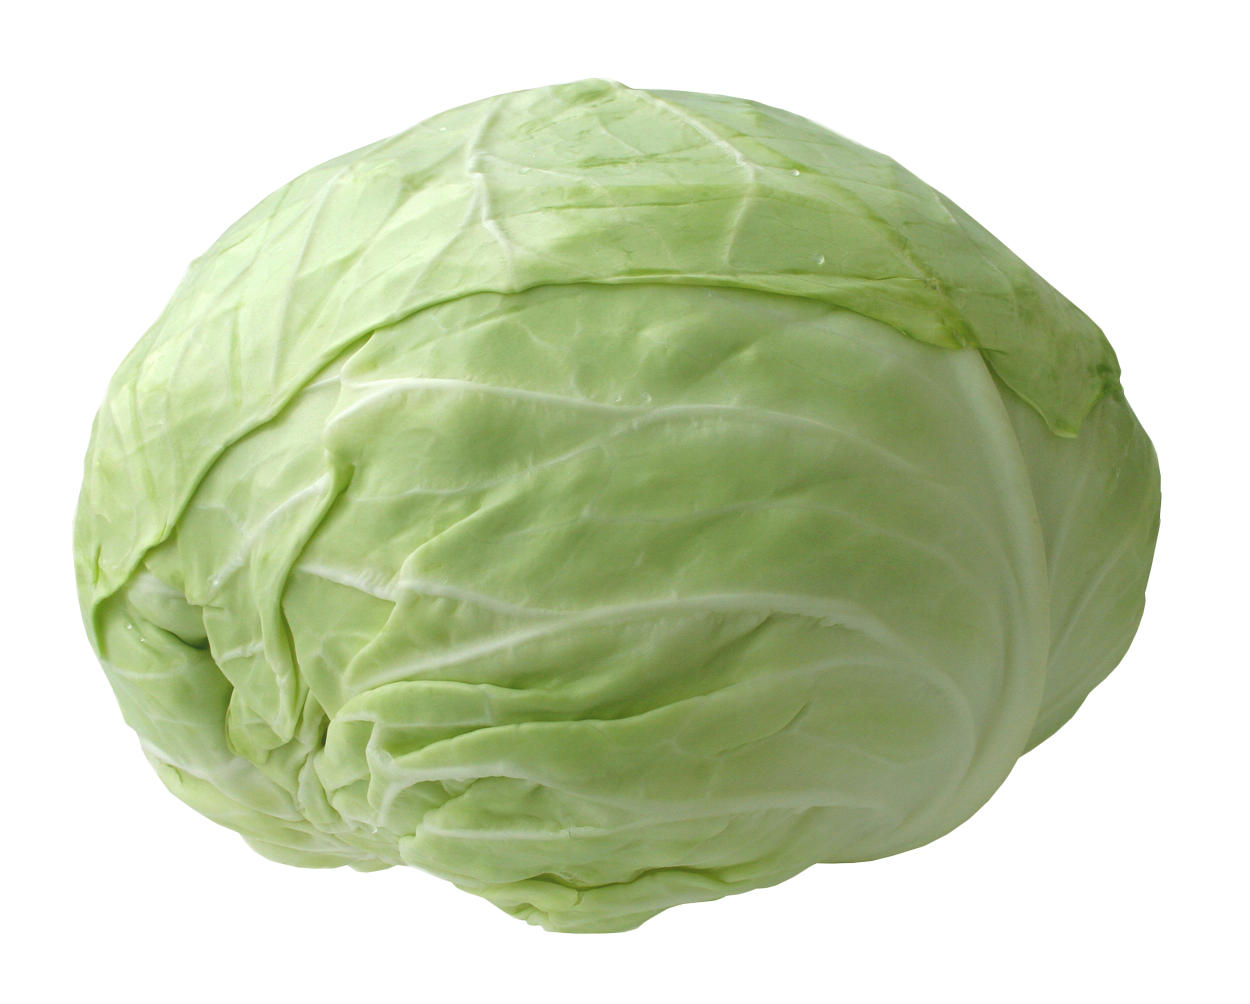 Cabbage PNG Picture